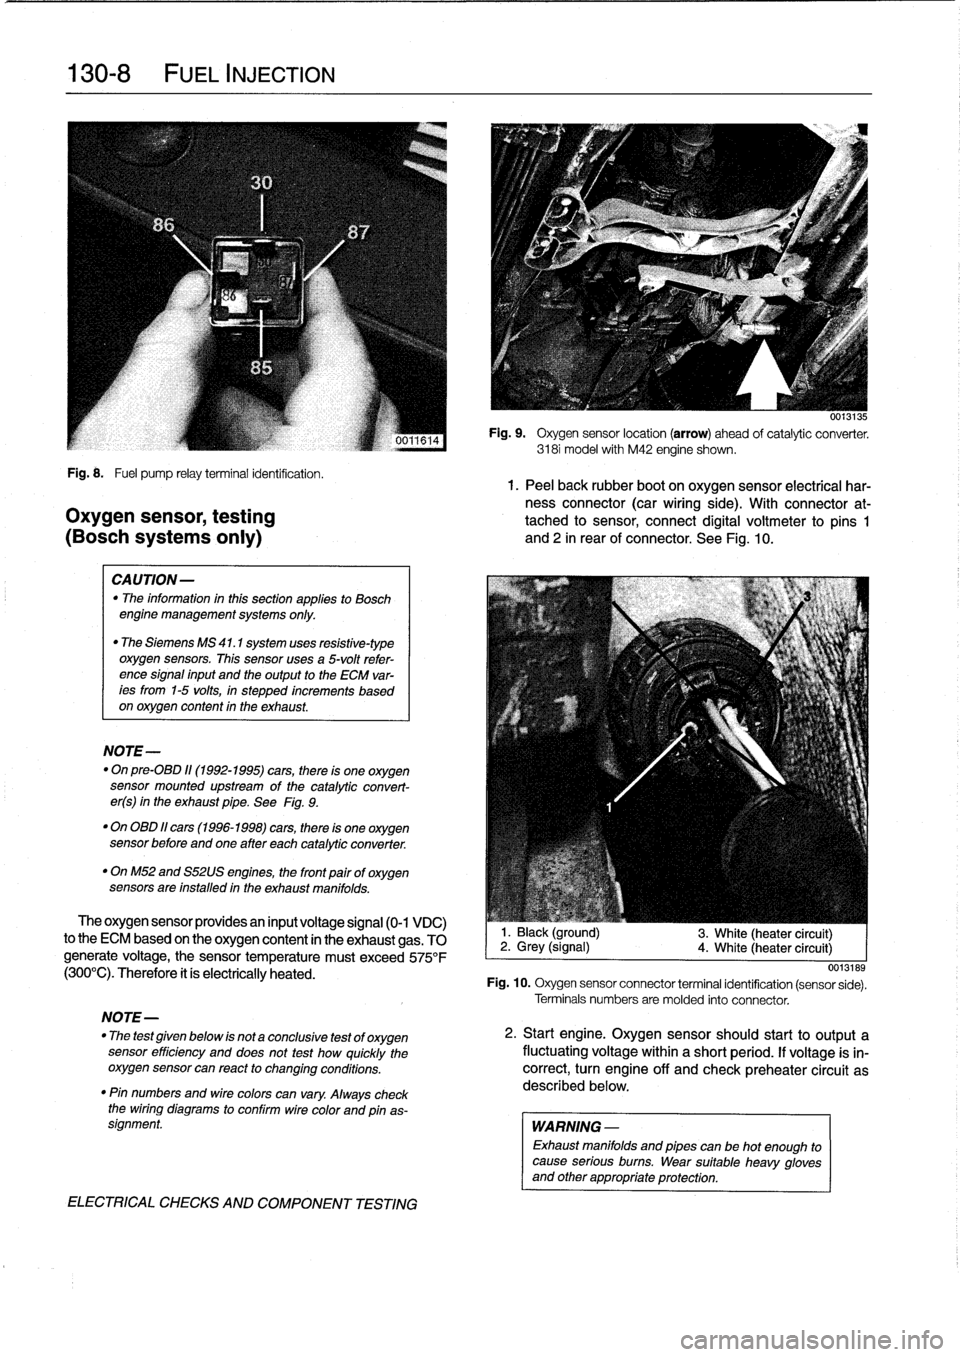 BMW 325i 1993 E36 Owners Guide 
130-
8

	

FUEL
INJECTION

Fig
.
8
.

	

Fuel
pump
relayterminal
identification
.
1.
Peel
back
rubber
boot
on
oxygen
sensor
electrical
har-
ness
connector
(car
wiring
side)
.
With
connector
at-
Oxyge